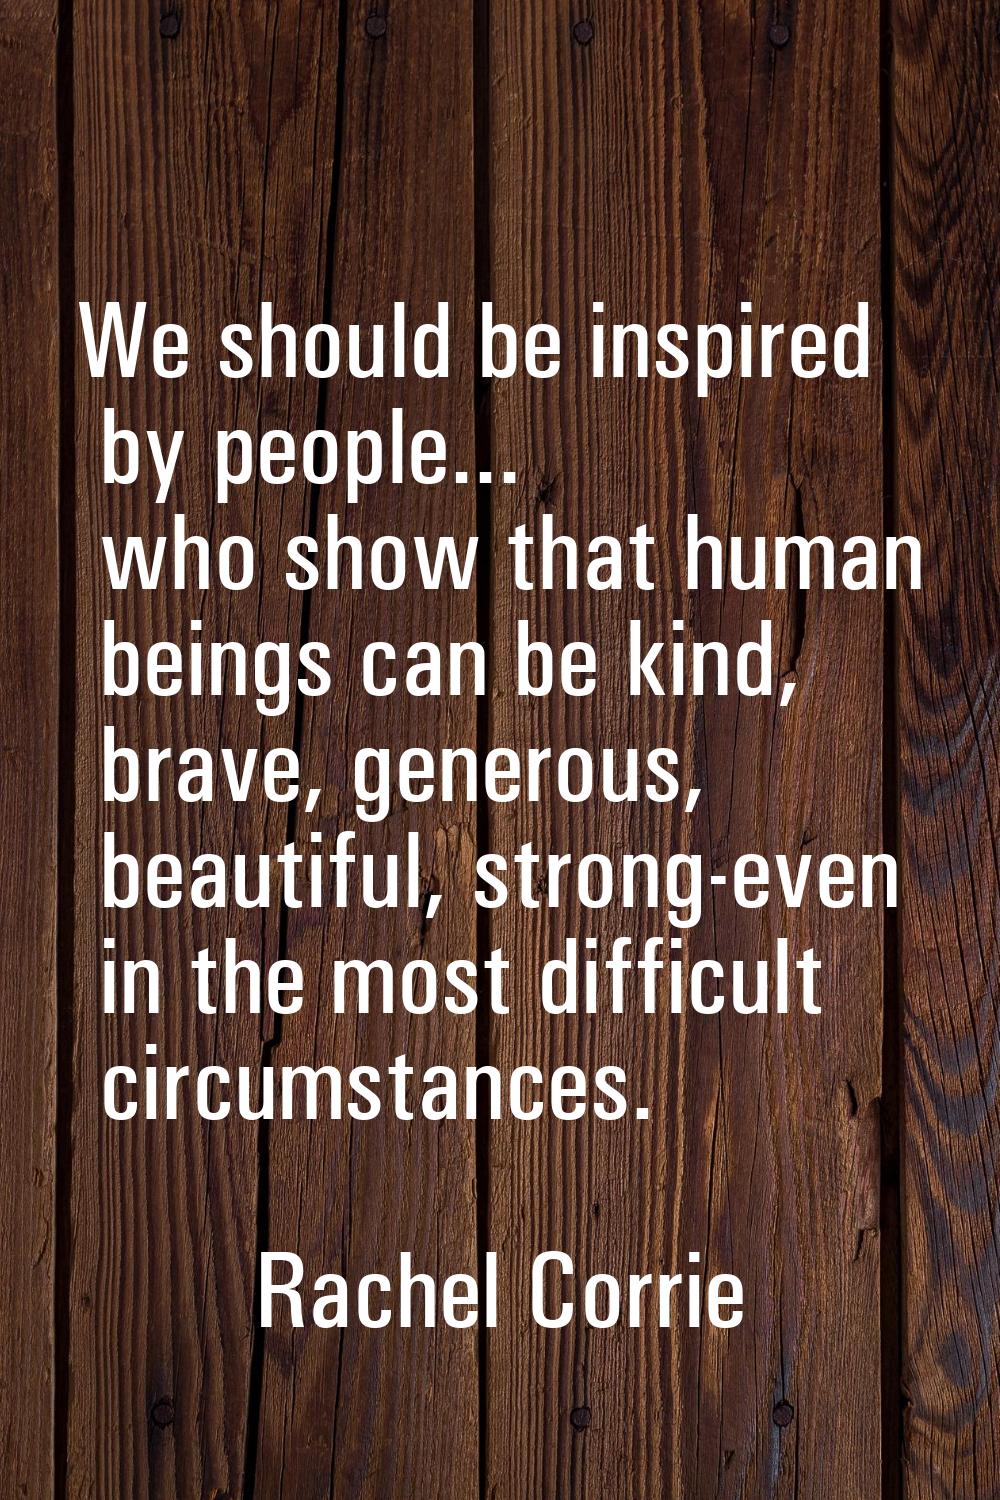 We should be inspired by people... who show that human beings can be kind, brave, generous, beautif